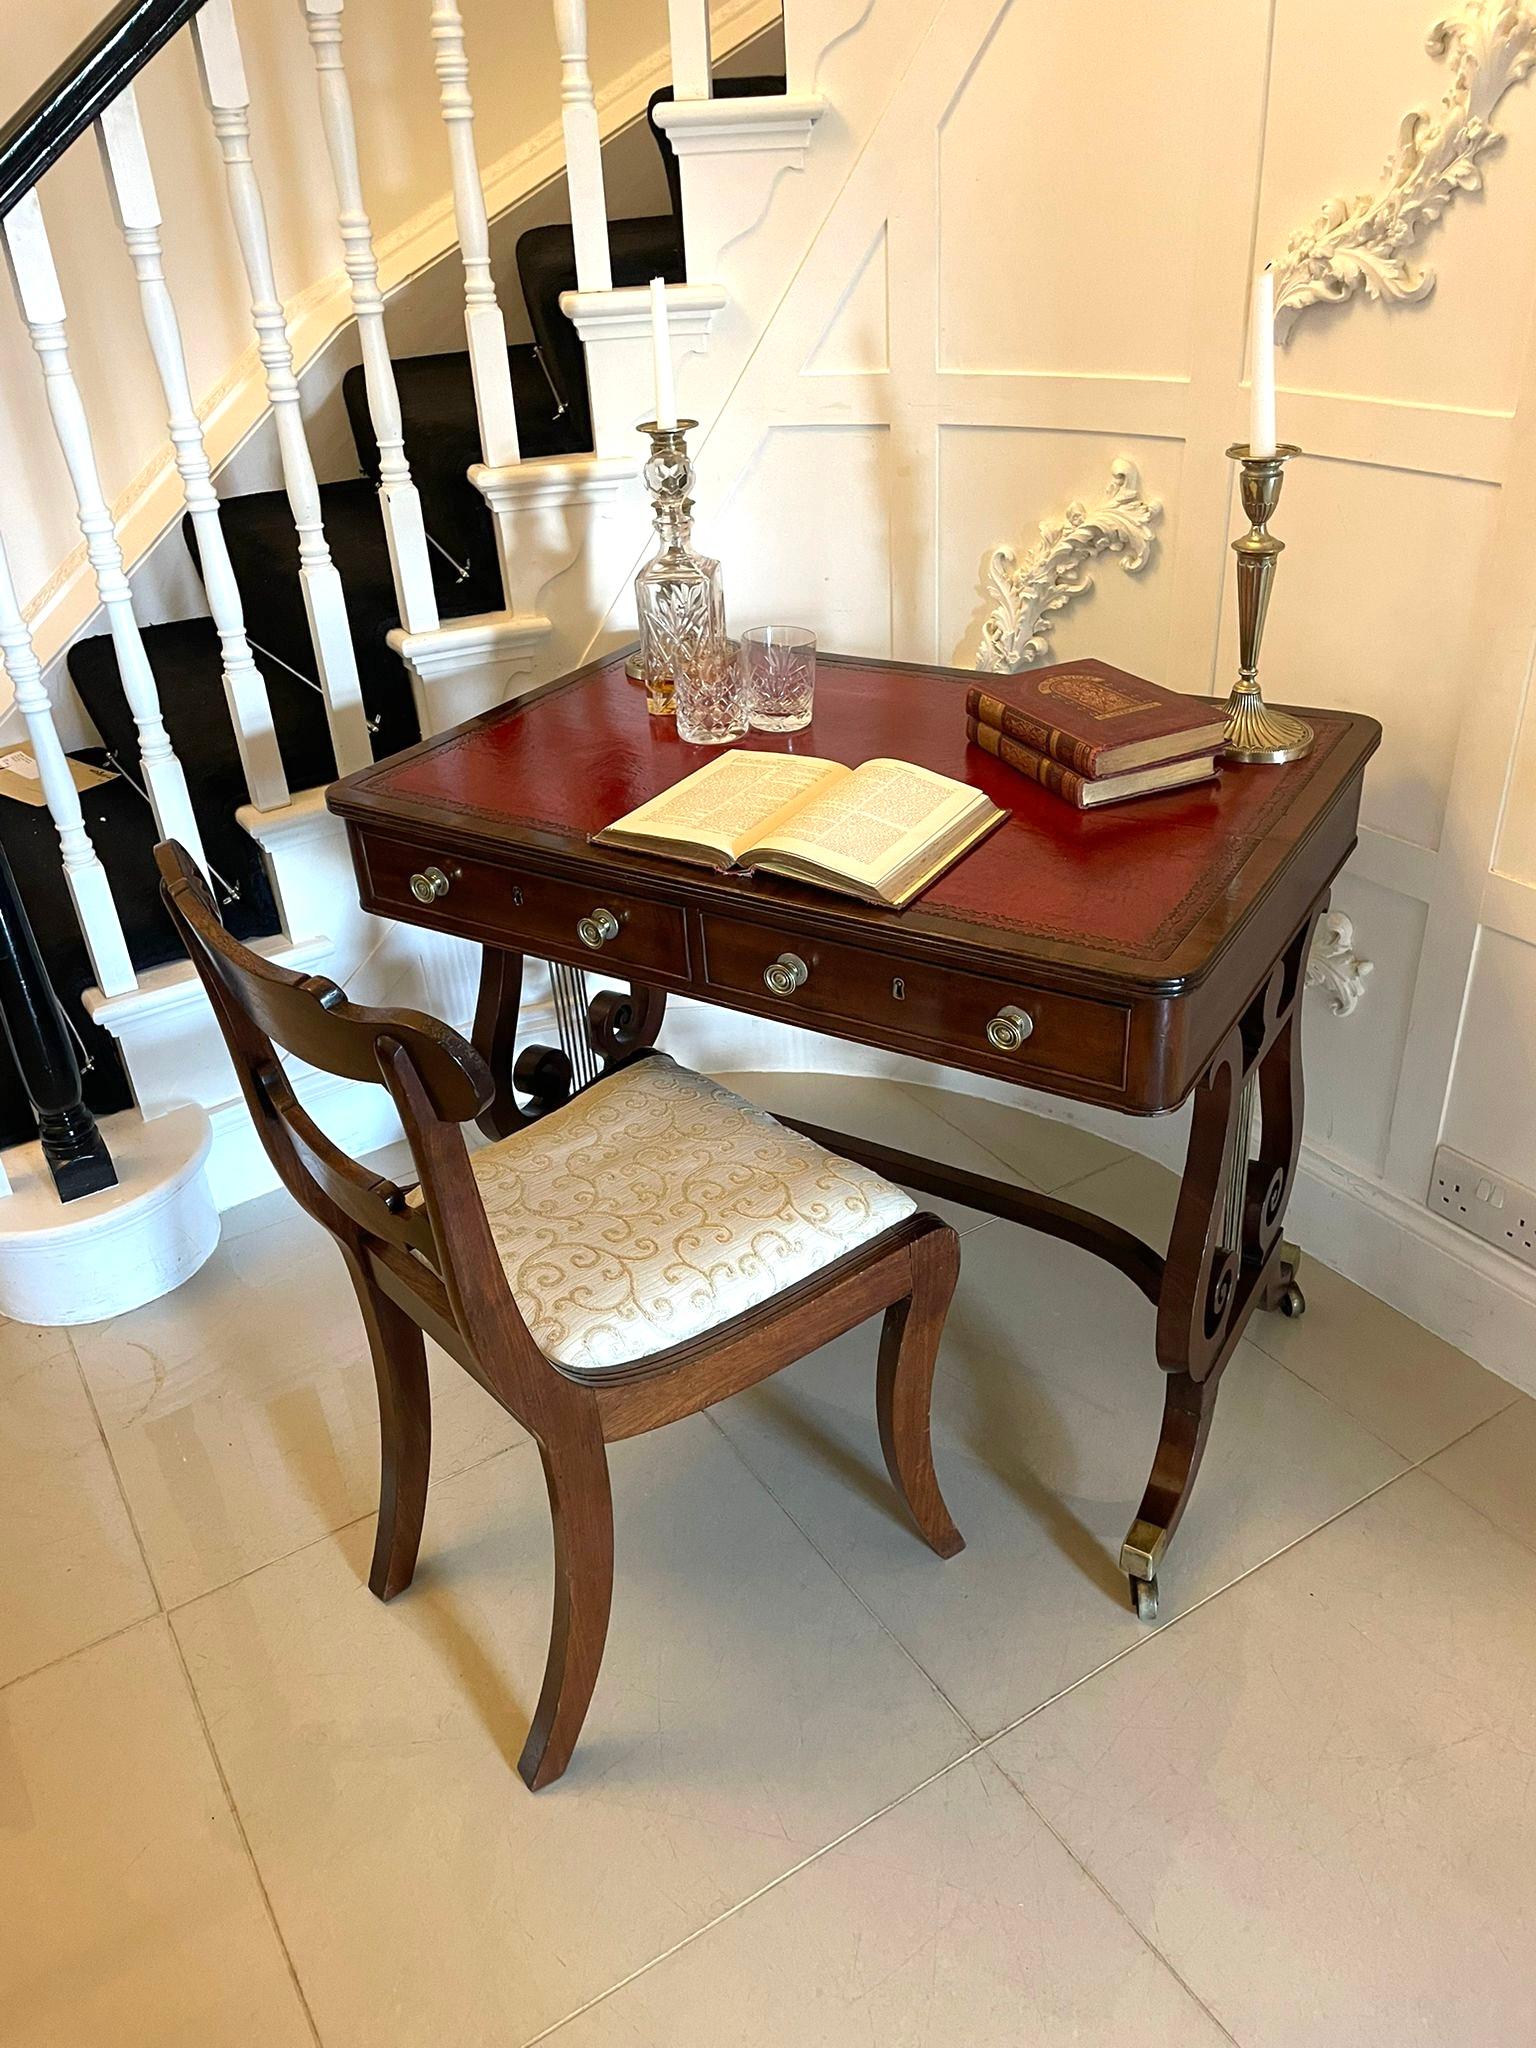 Superb Quality Antique Regency Mahogany Free Standing Writing Desk In Good Condition For Sale In Suffolk, GB